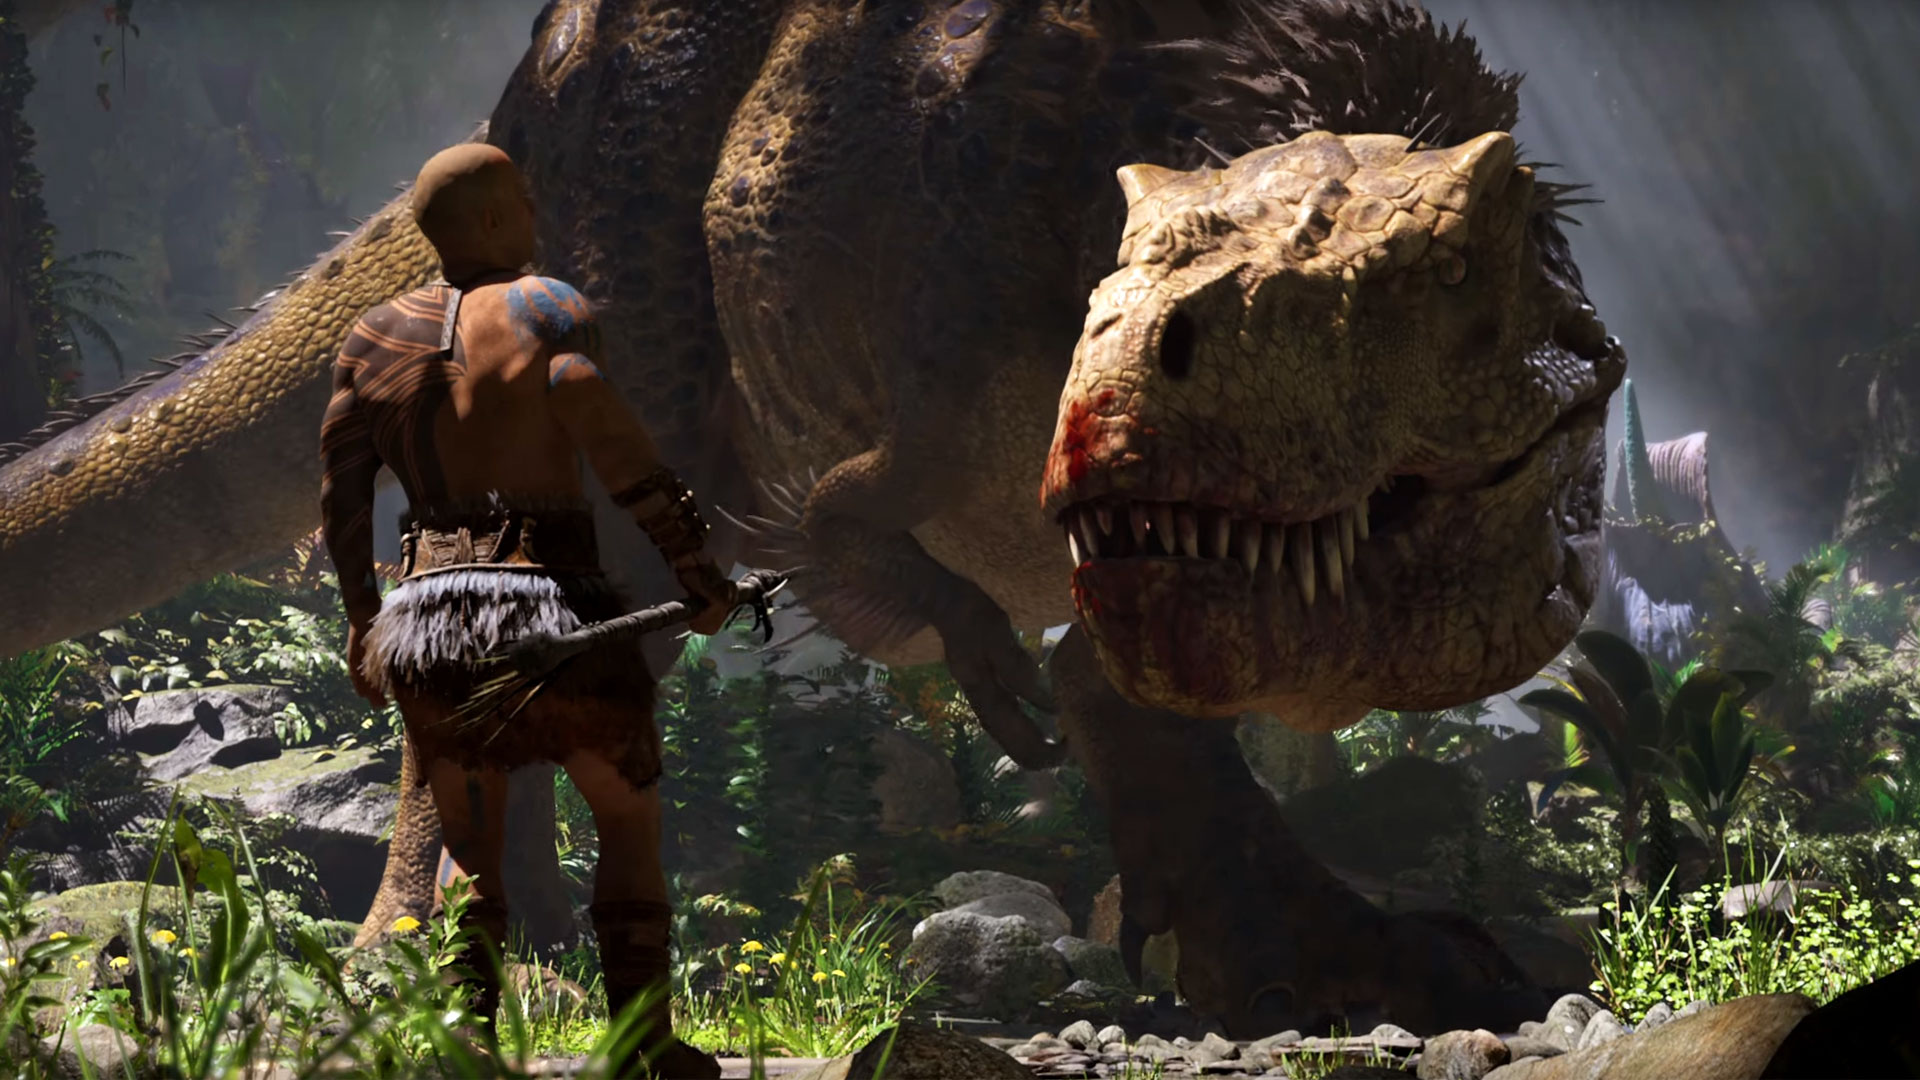 Ark 2 Release Date - Here's When the Sequel Featuring